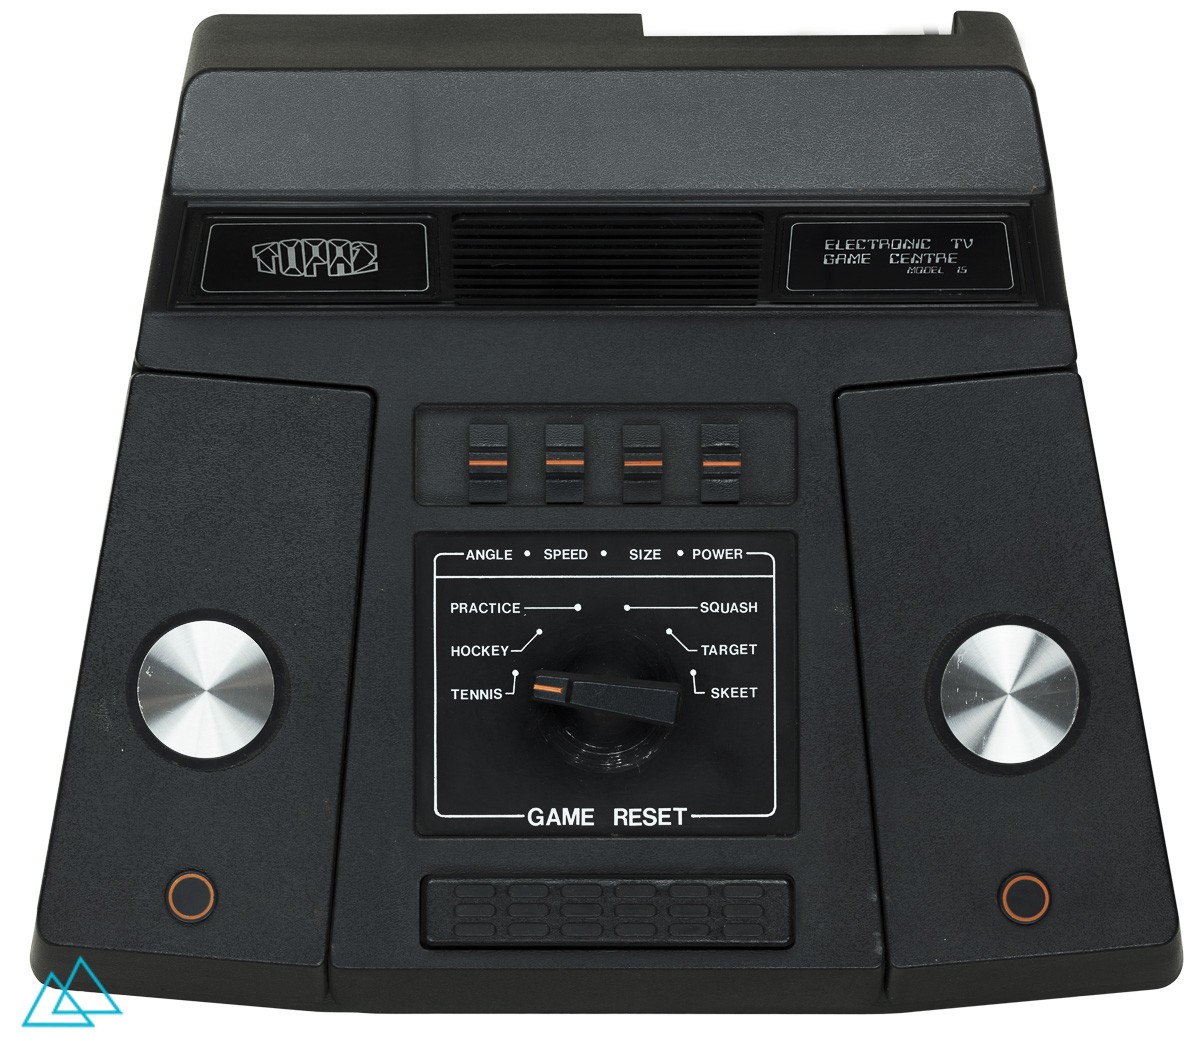 Top view Topaz Electronic TV Game Centre Model 15